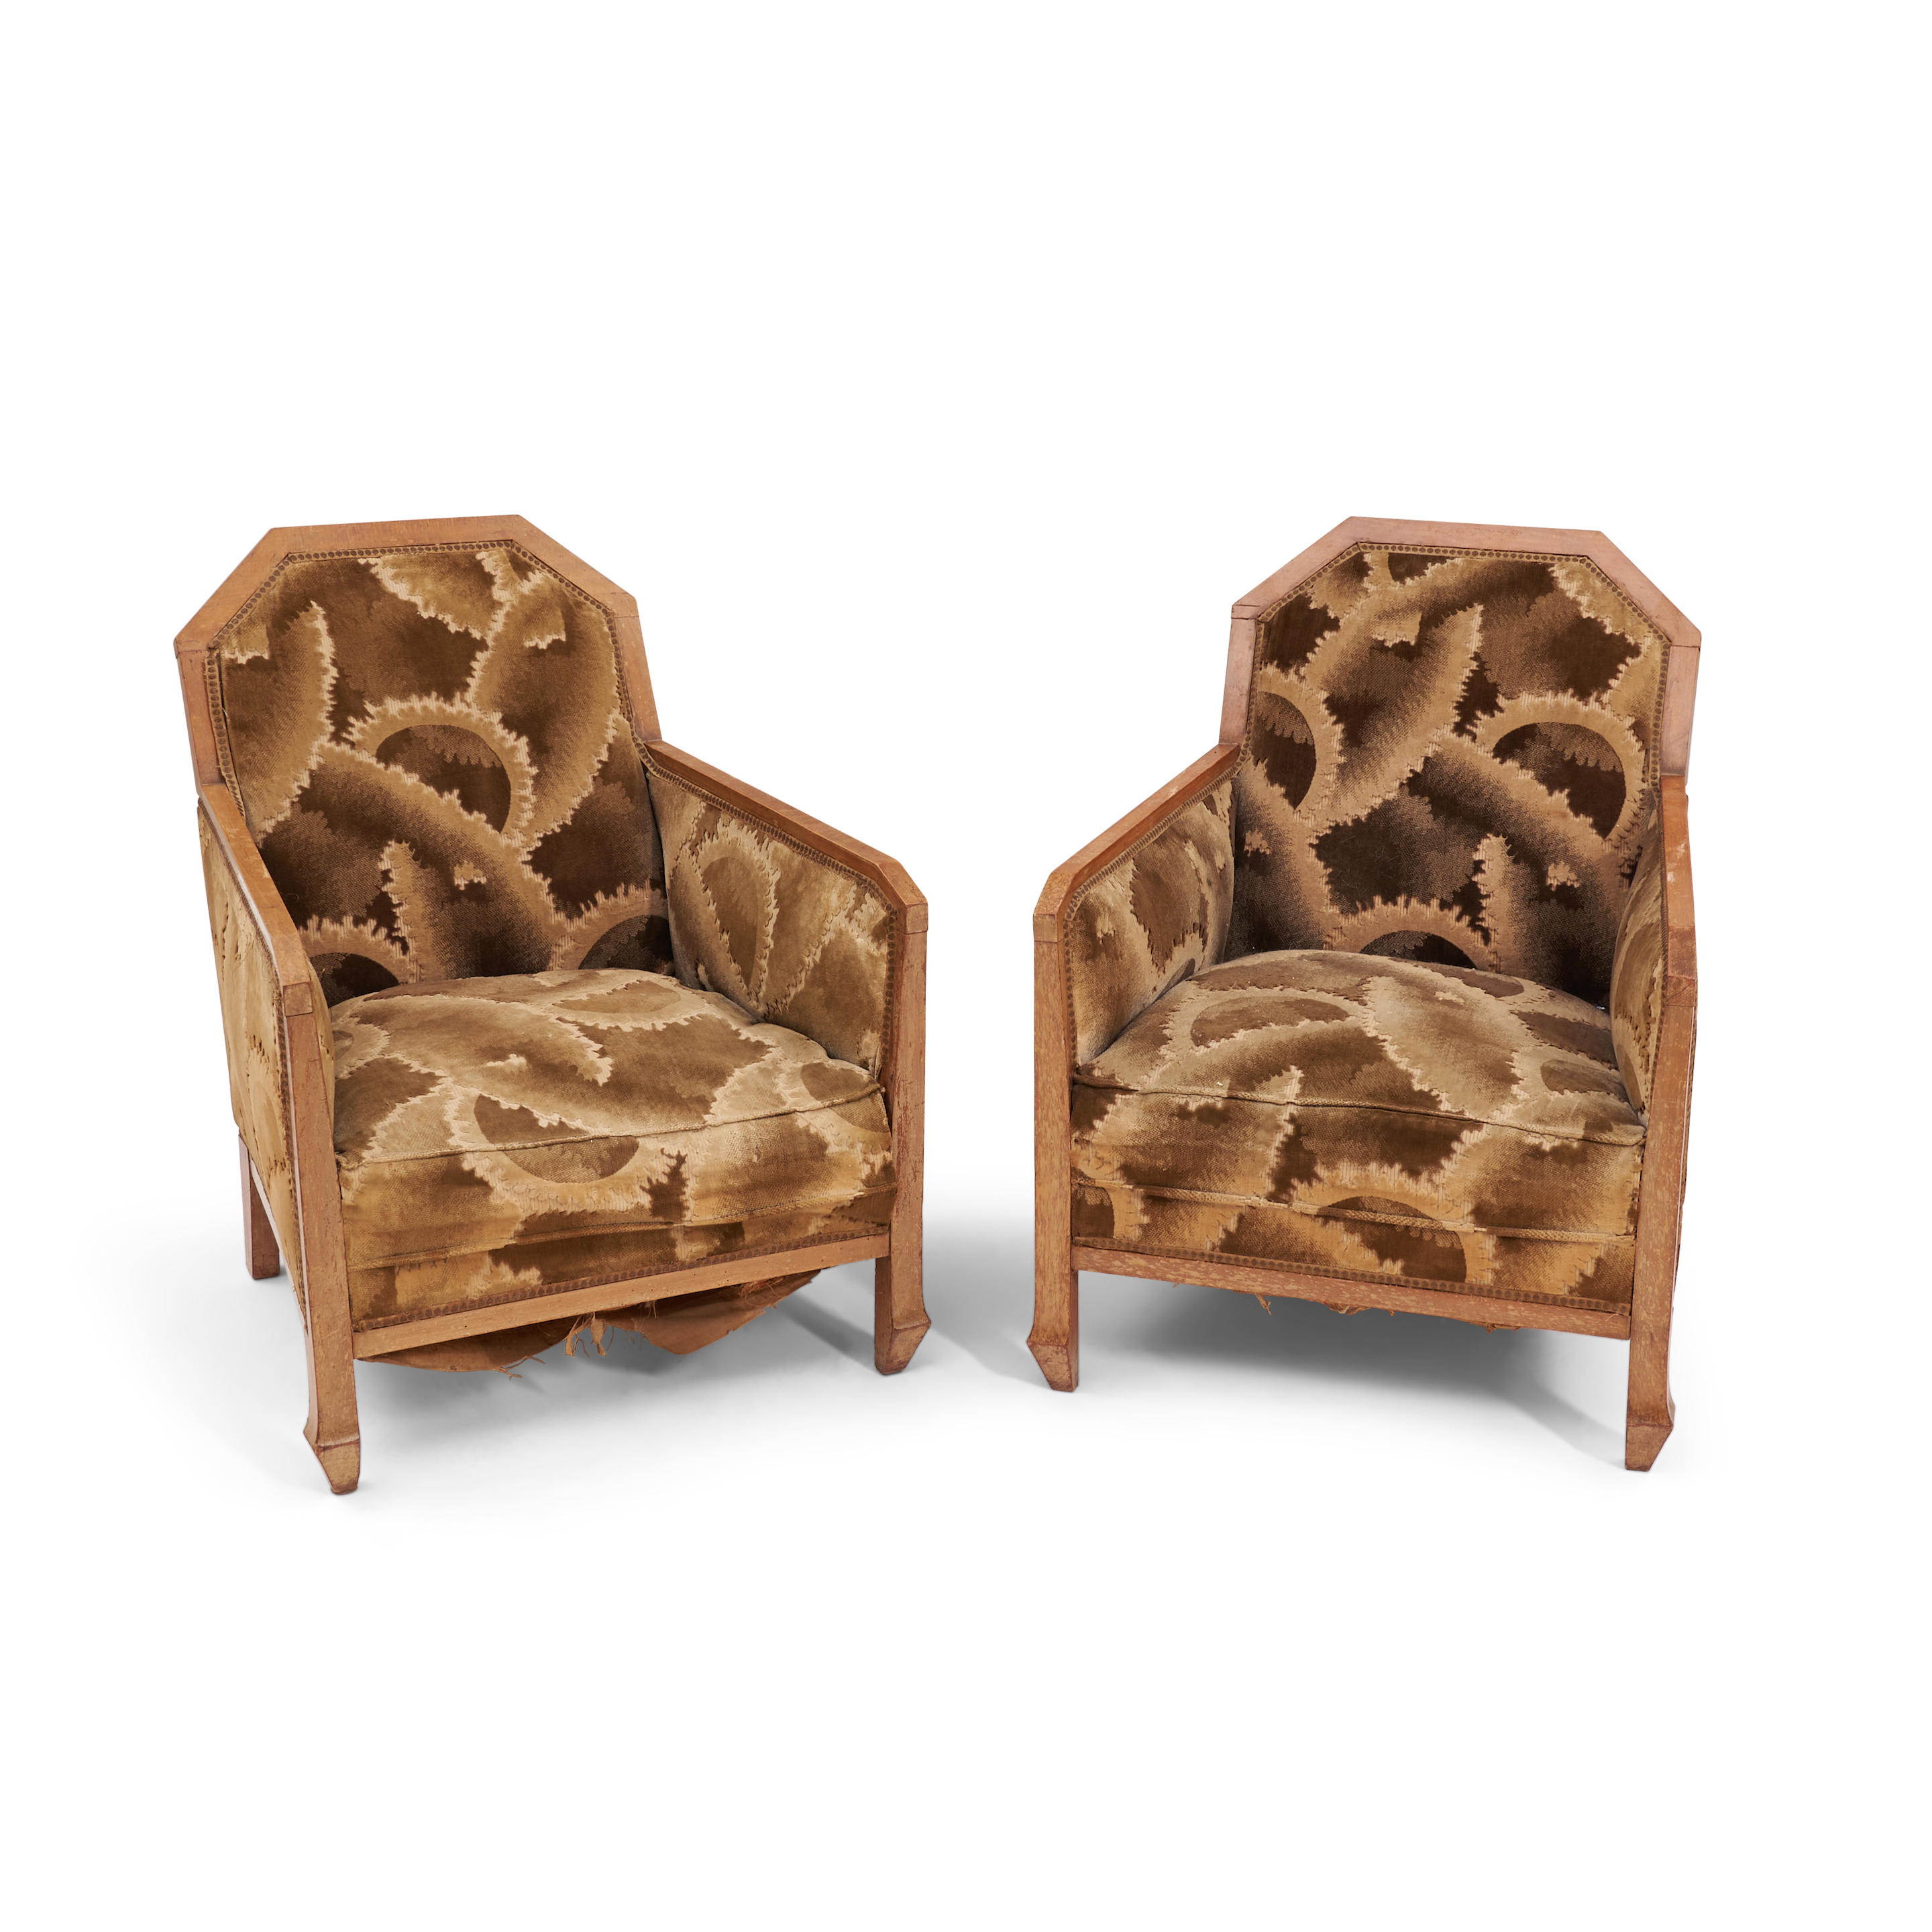 PAIR OF ART DECO-STYLE FRUITWOOD